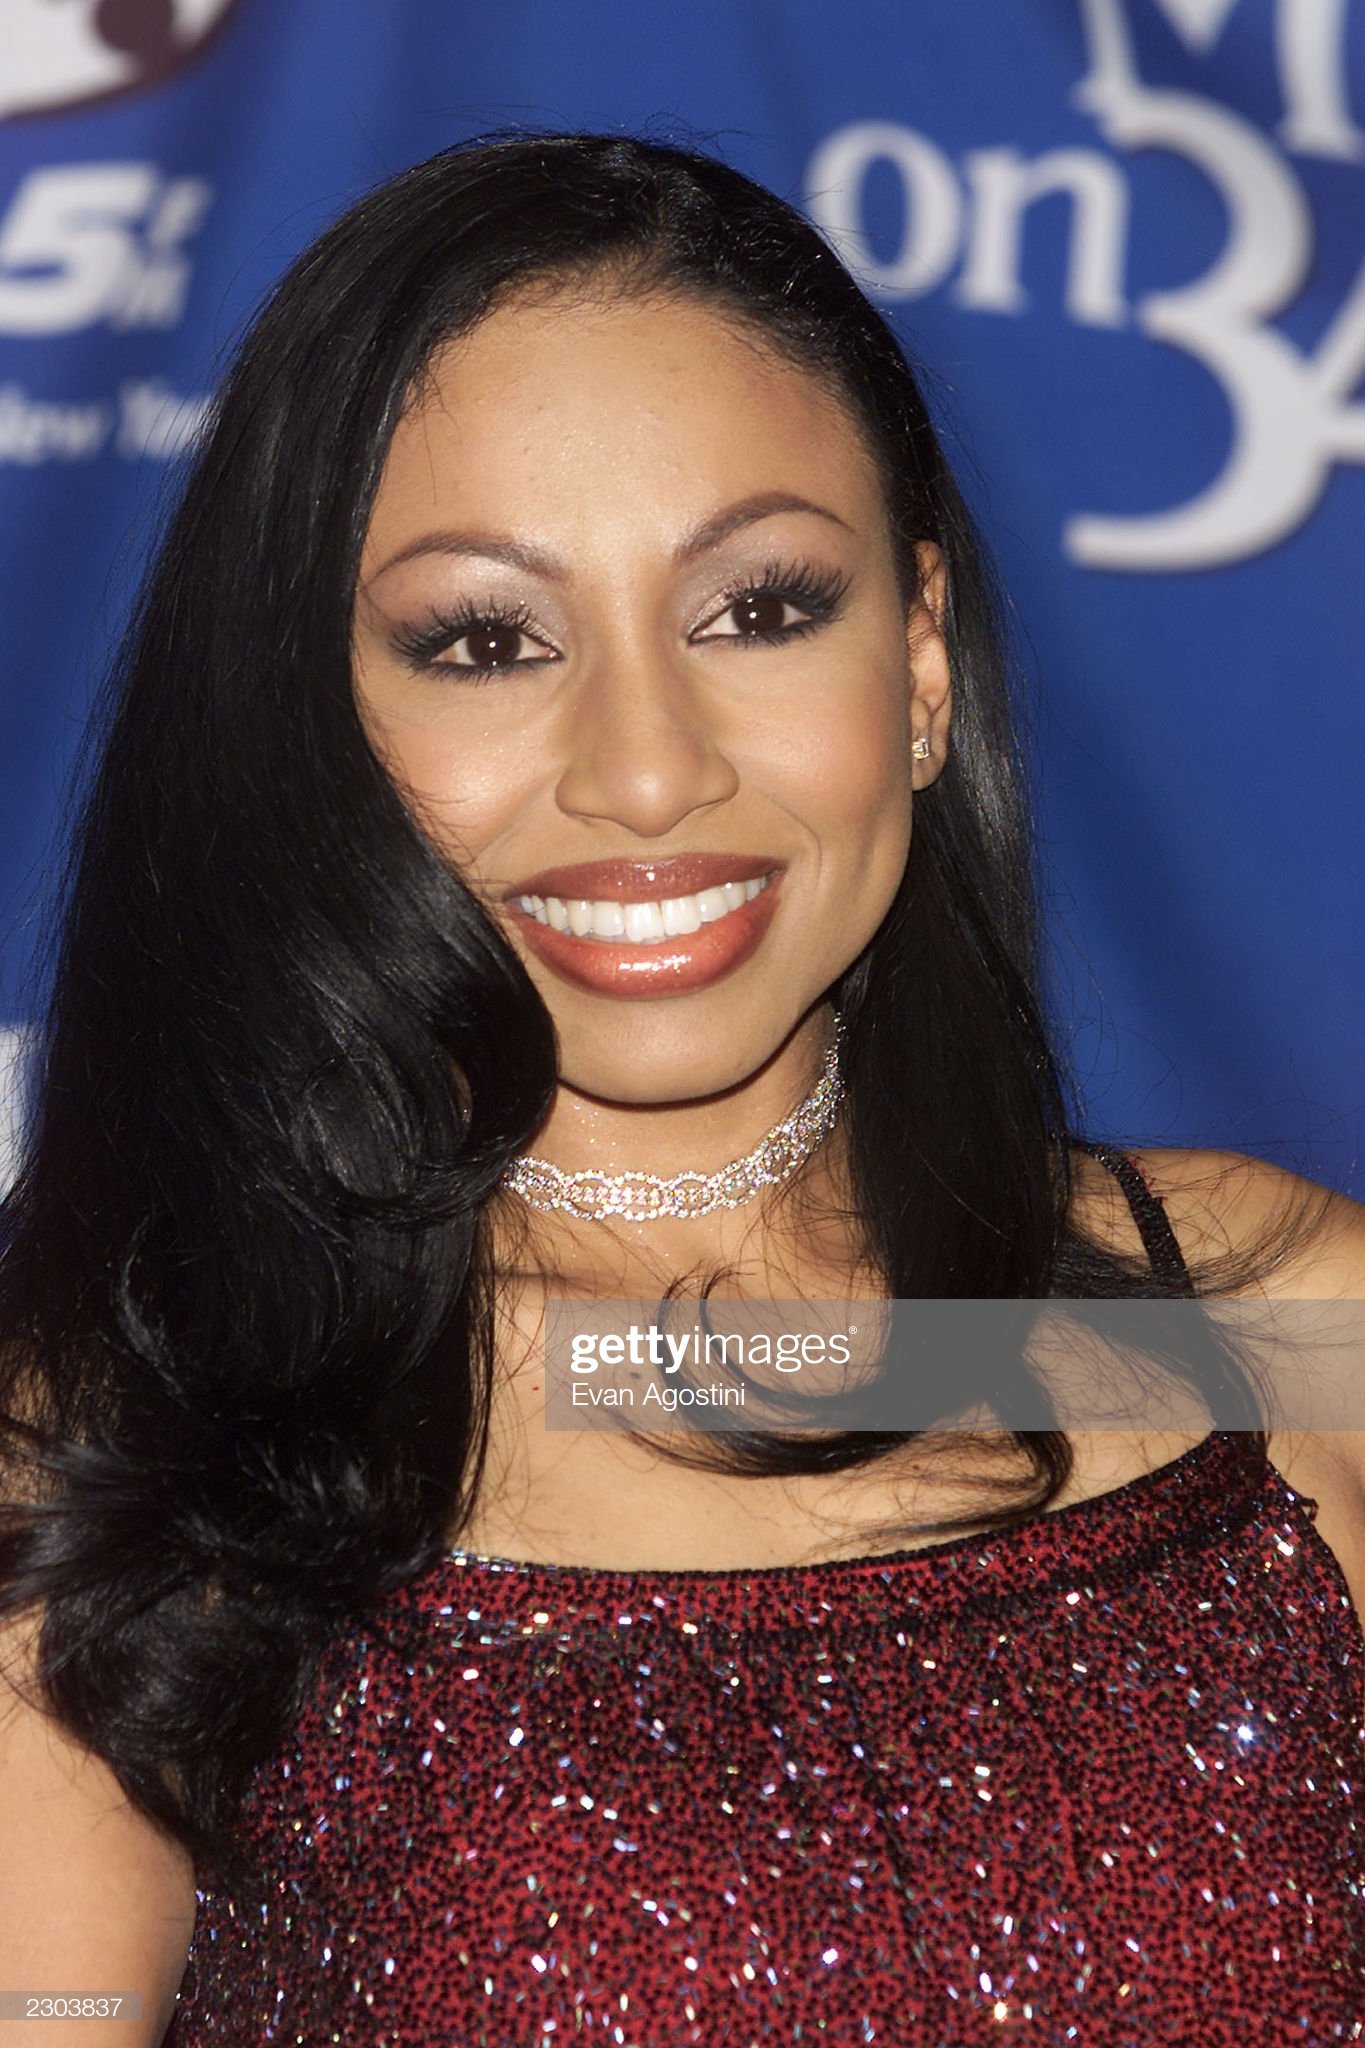  Singer Debelah Morgan at the 'Miracle on 34th Street' all-star concert at Madison Square Garden. 12/19/2000. Photo: Evan Agostini/ImageDirect 